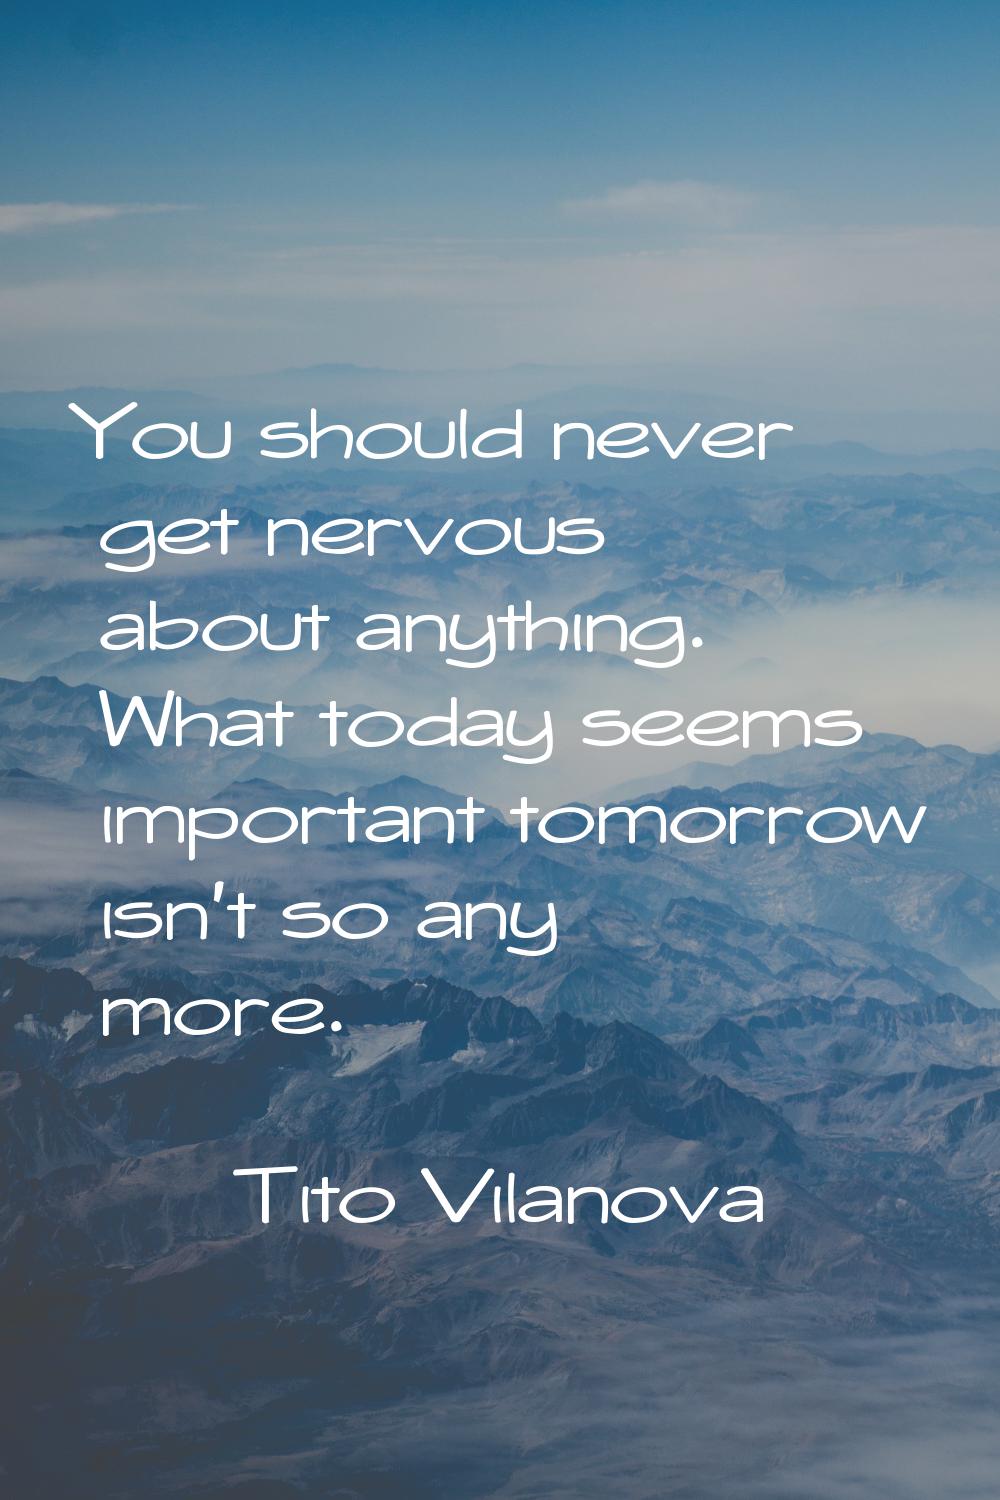 You should never get nervous about anything. What today seems important tomorrow isn't so any more.